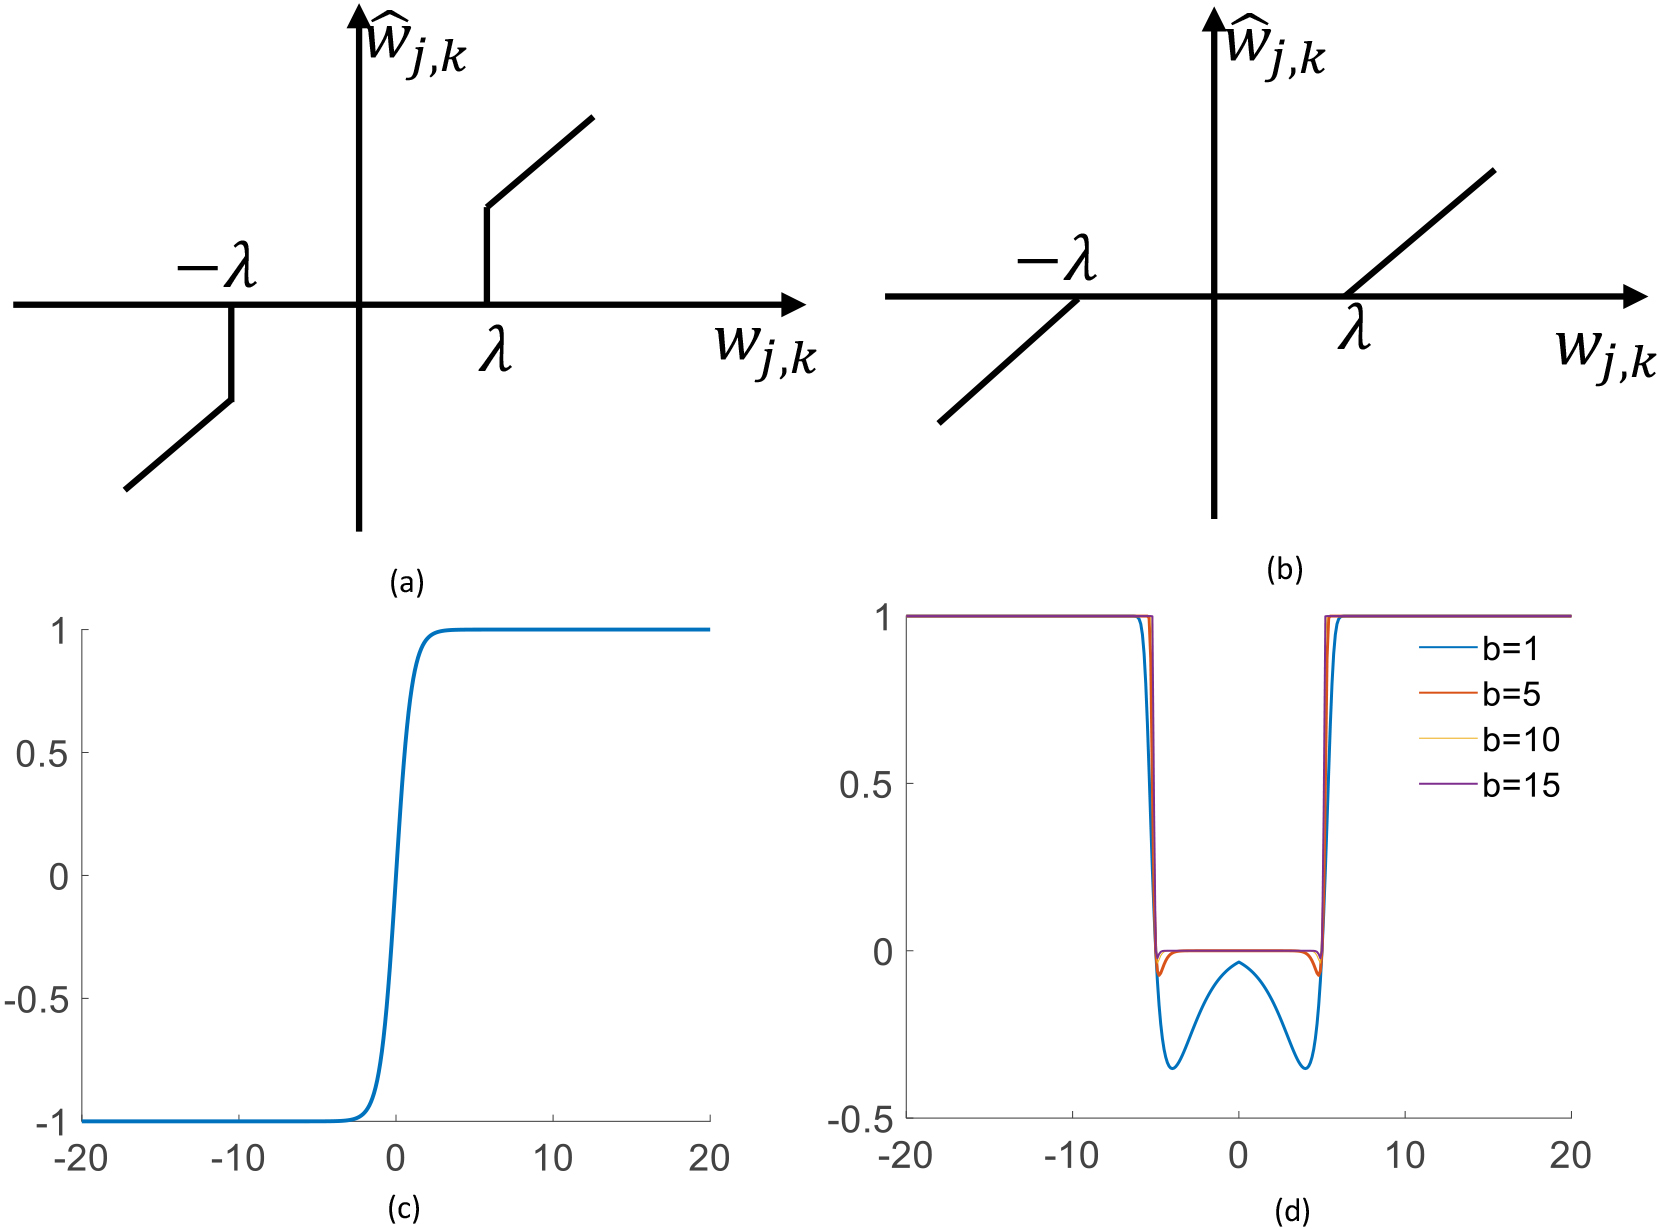 (a) Schematic diagram of hard threshold function. (b) Schematic diagram of soft threshold function. (c) Schematic diagram of hyperbolic tangent function. (d) g⁢(wj,k) function curve under different b values.